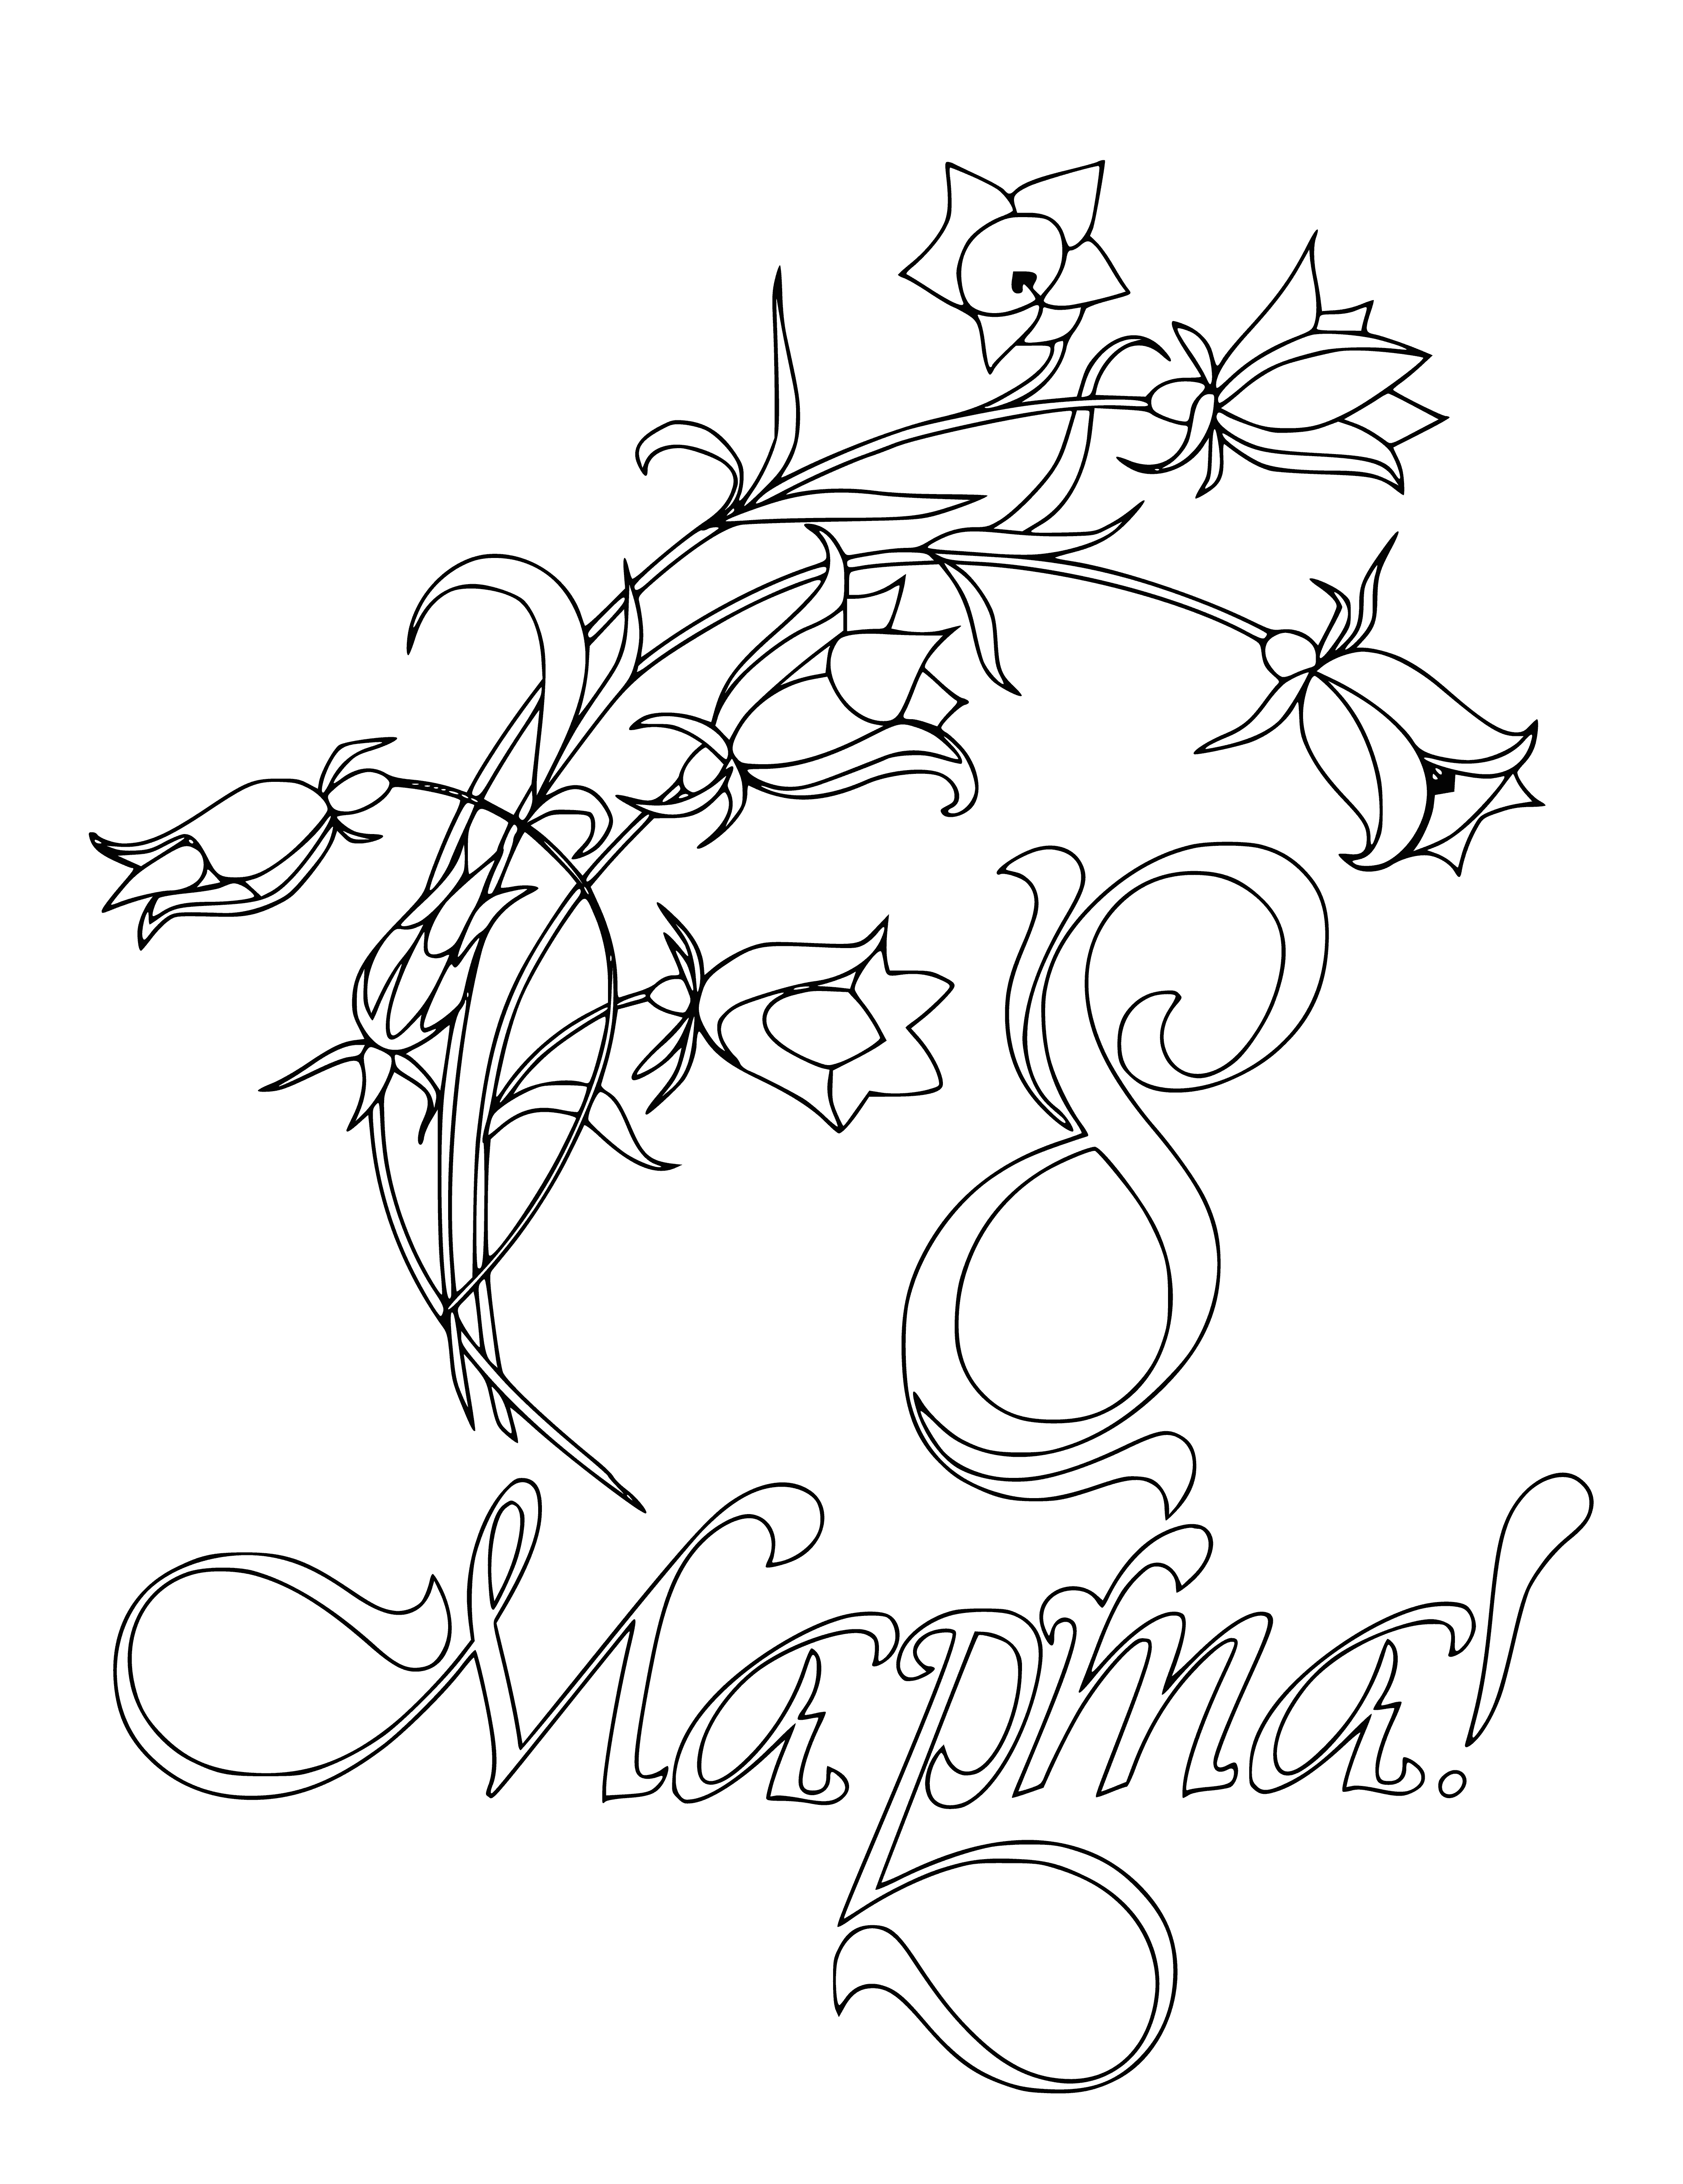 Bells coloring page